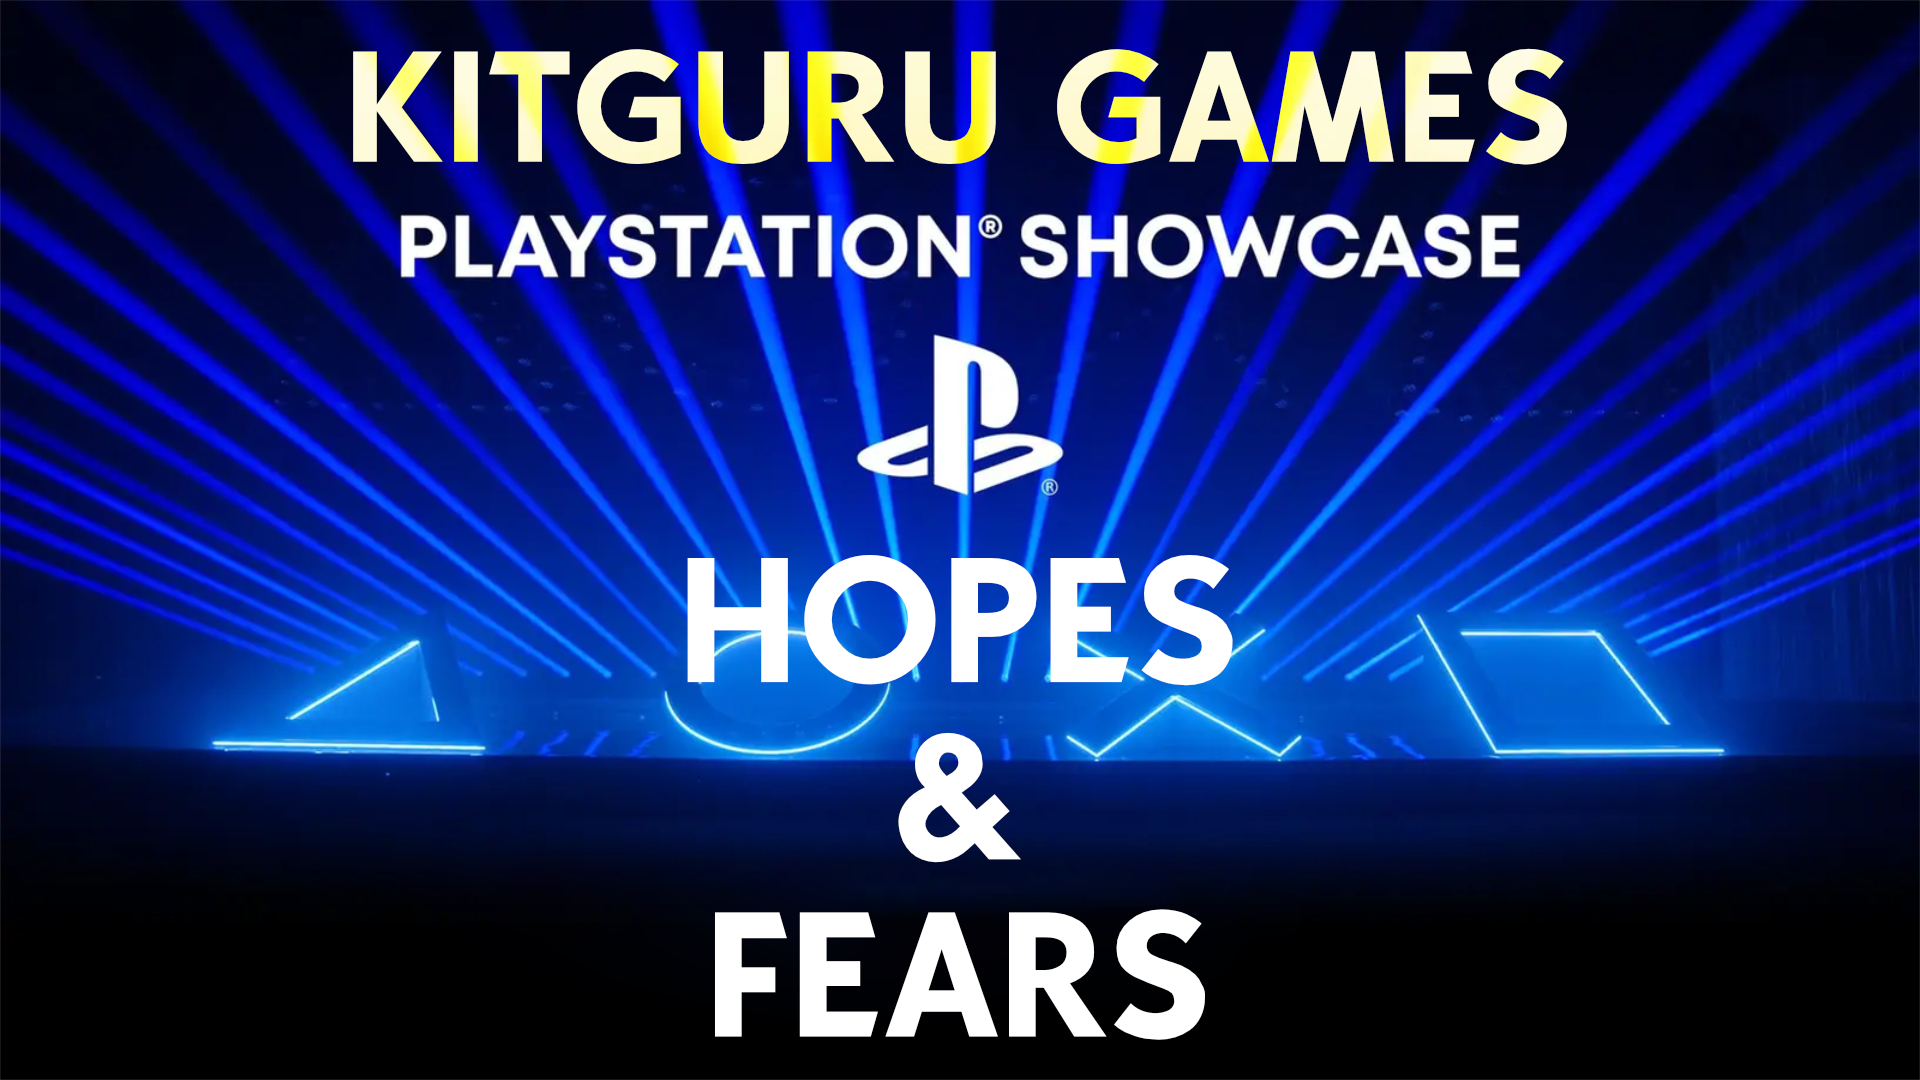 PlayStation Showcase Is Happening VERY Soon! - What Can We Expect To See? 